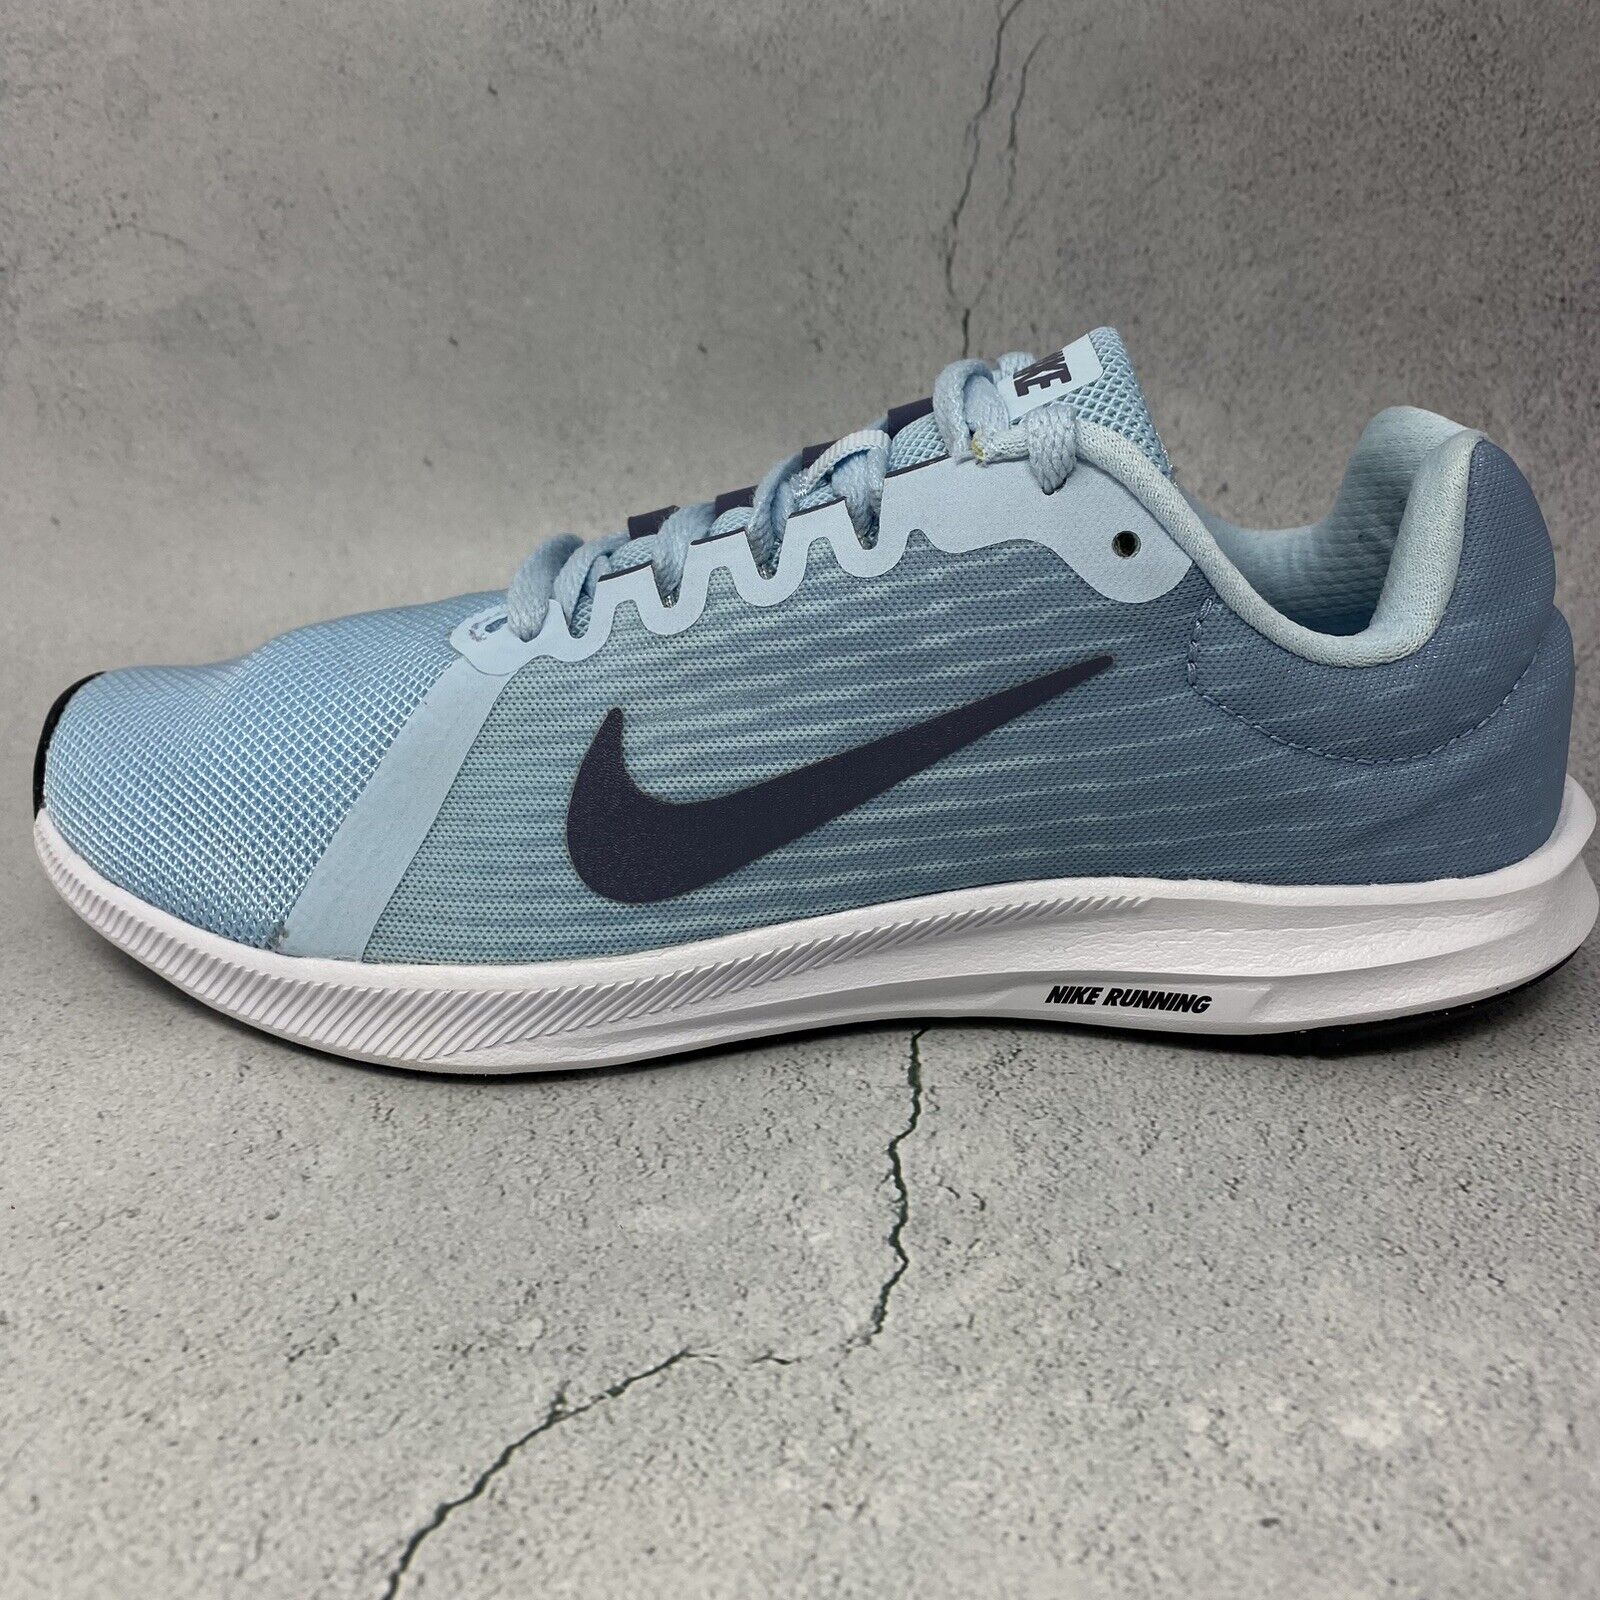 activation clean up Ban Nike Womens Downshifter 8 908994-400 Blue Running Shoes Sneakers Size 8 M |  eBay